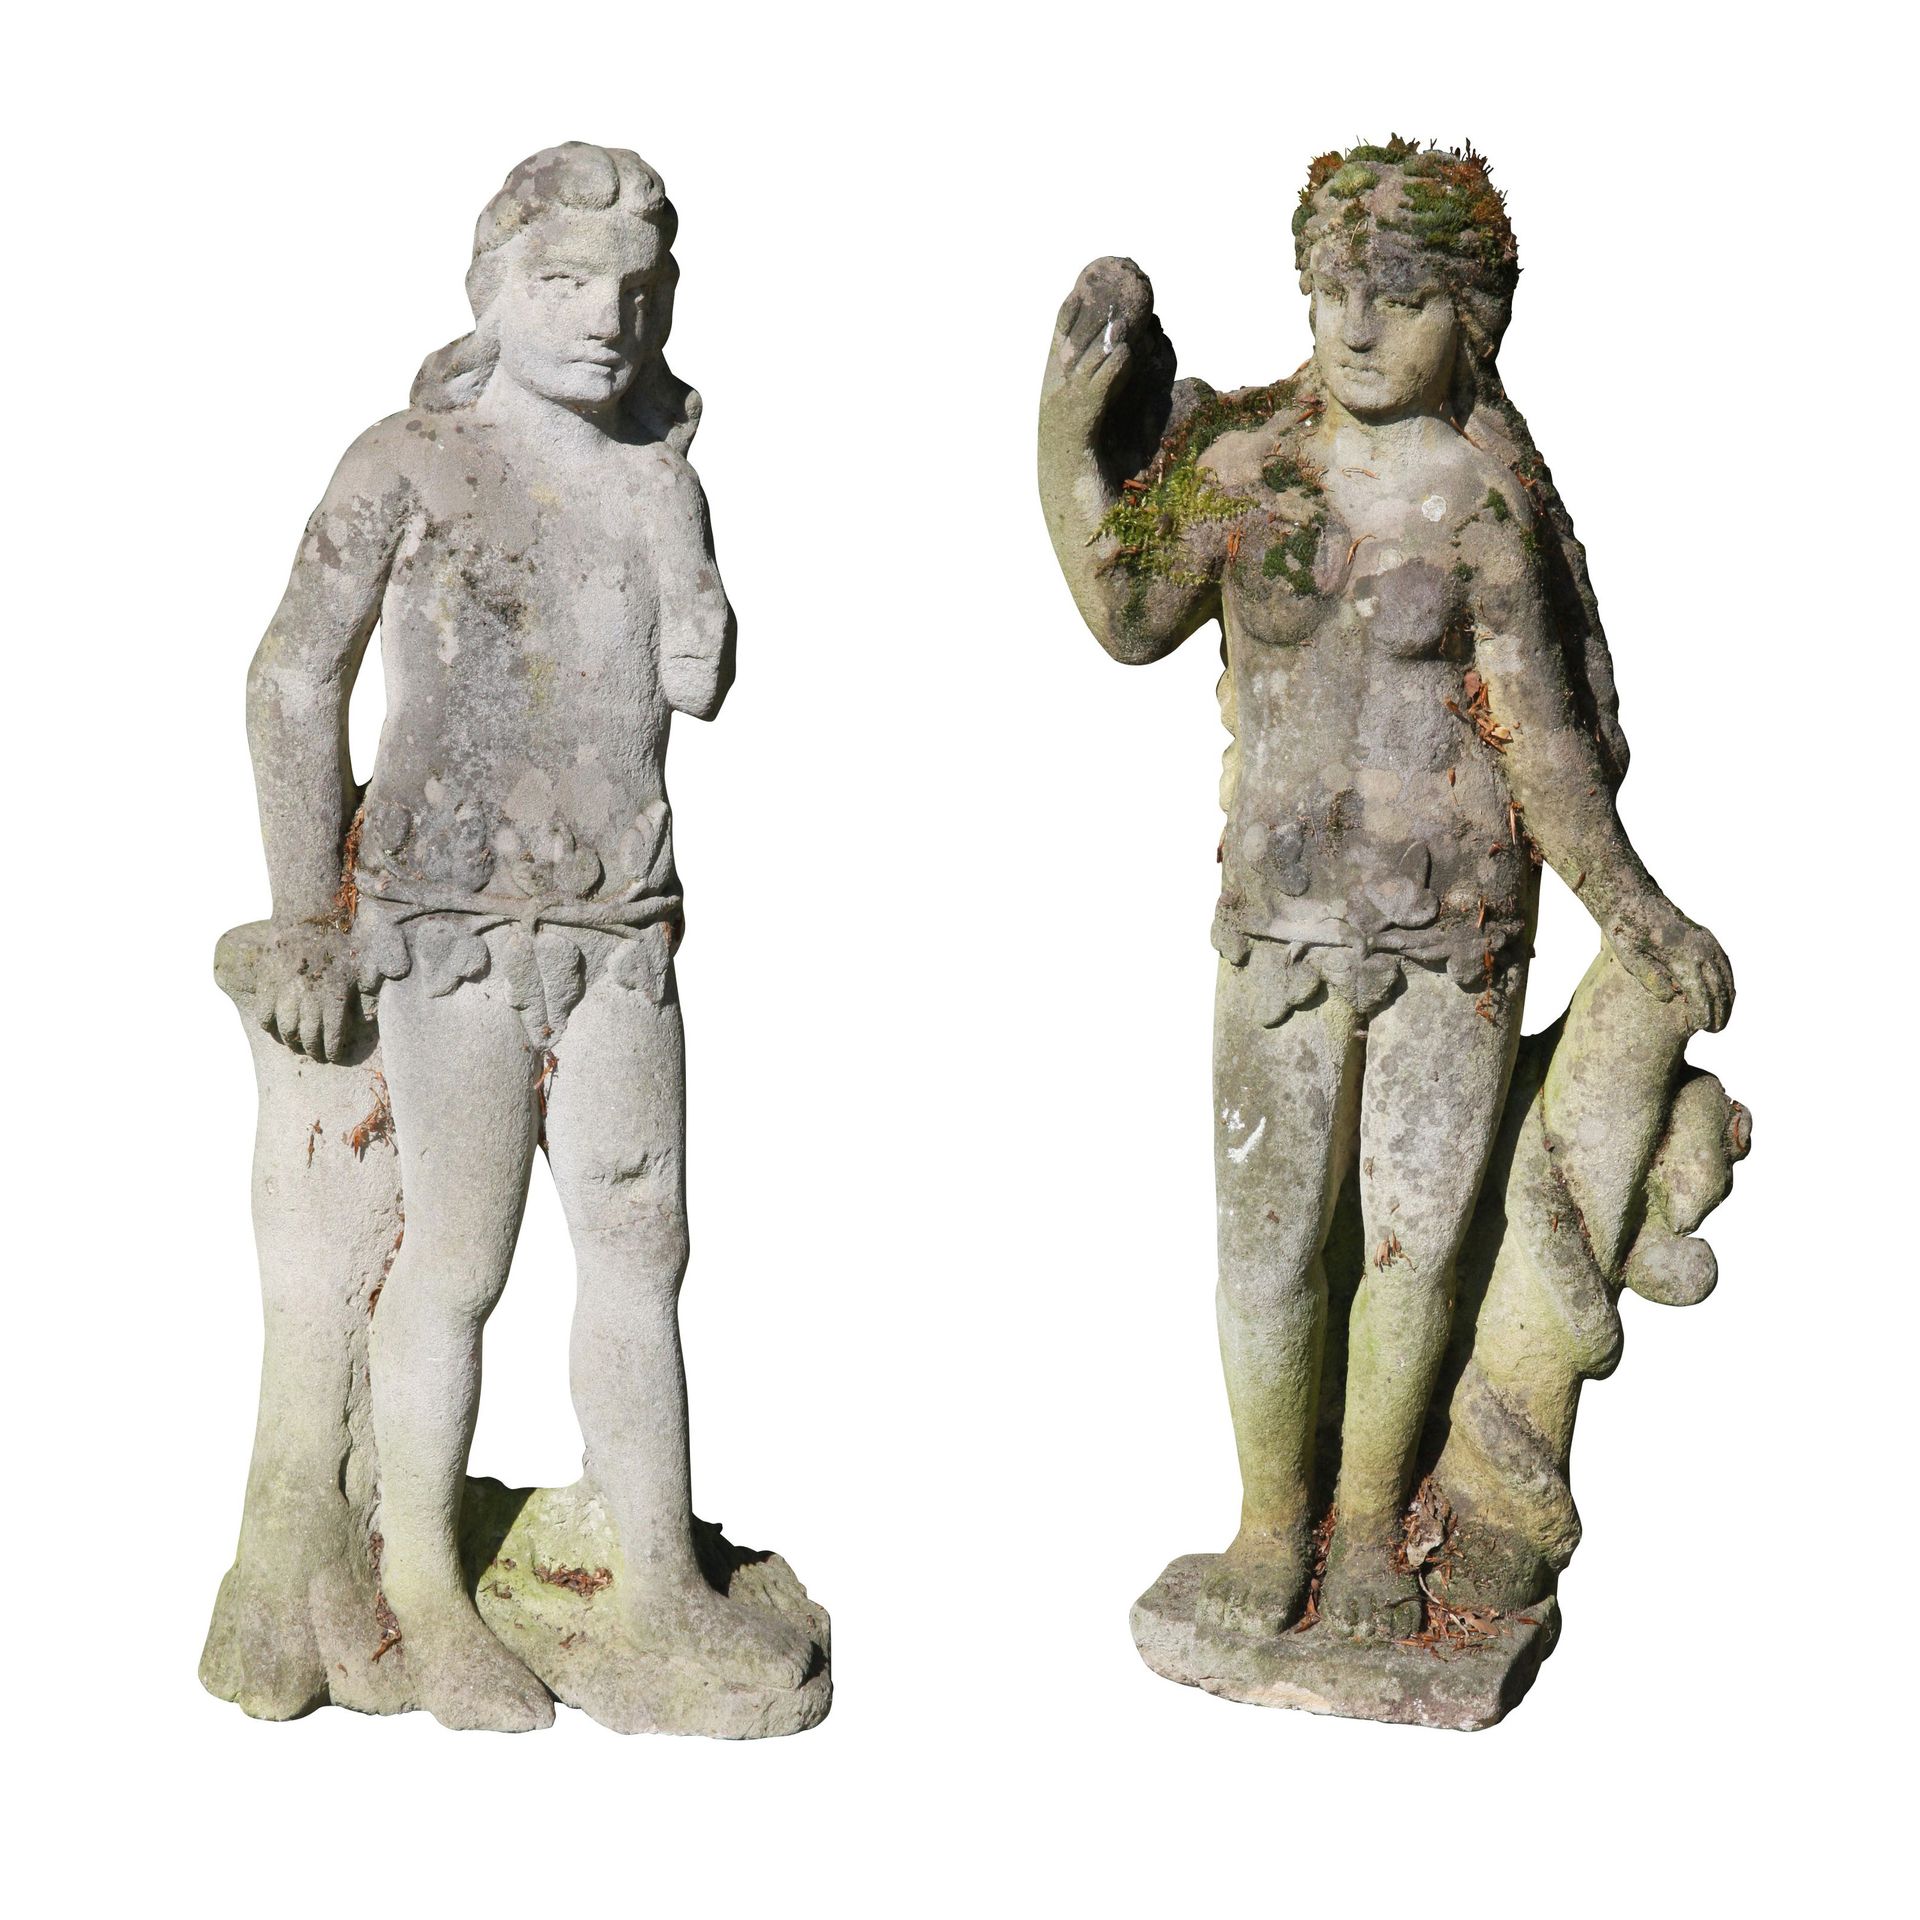 Null 1 Pair of statues "Adam and Eve" in stone.

Period : 20th century, probably&hellip;